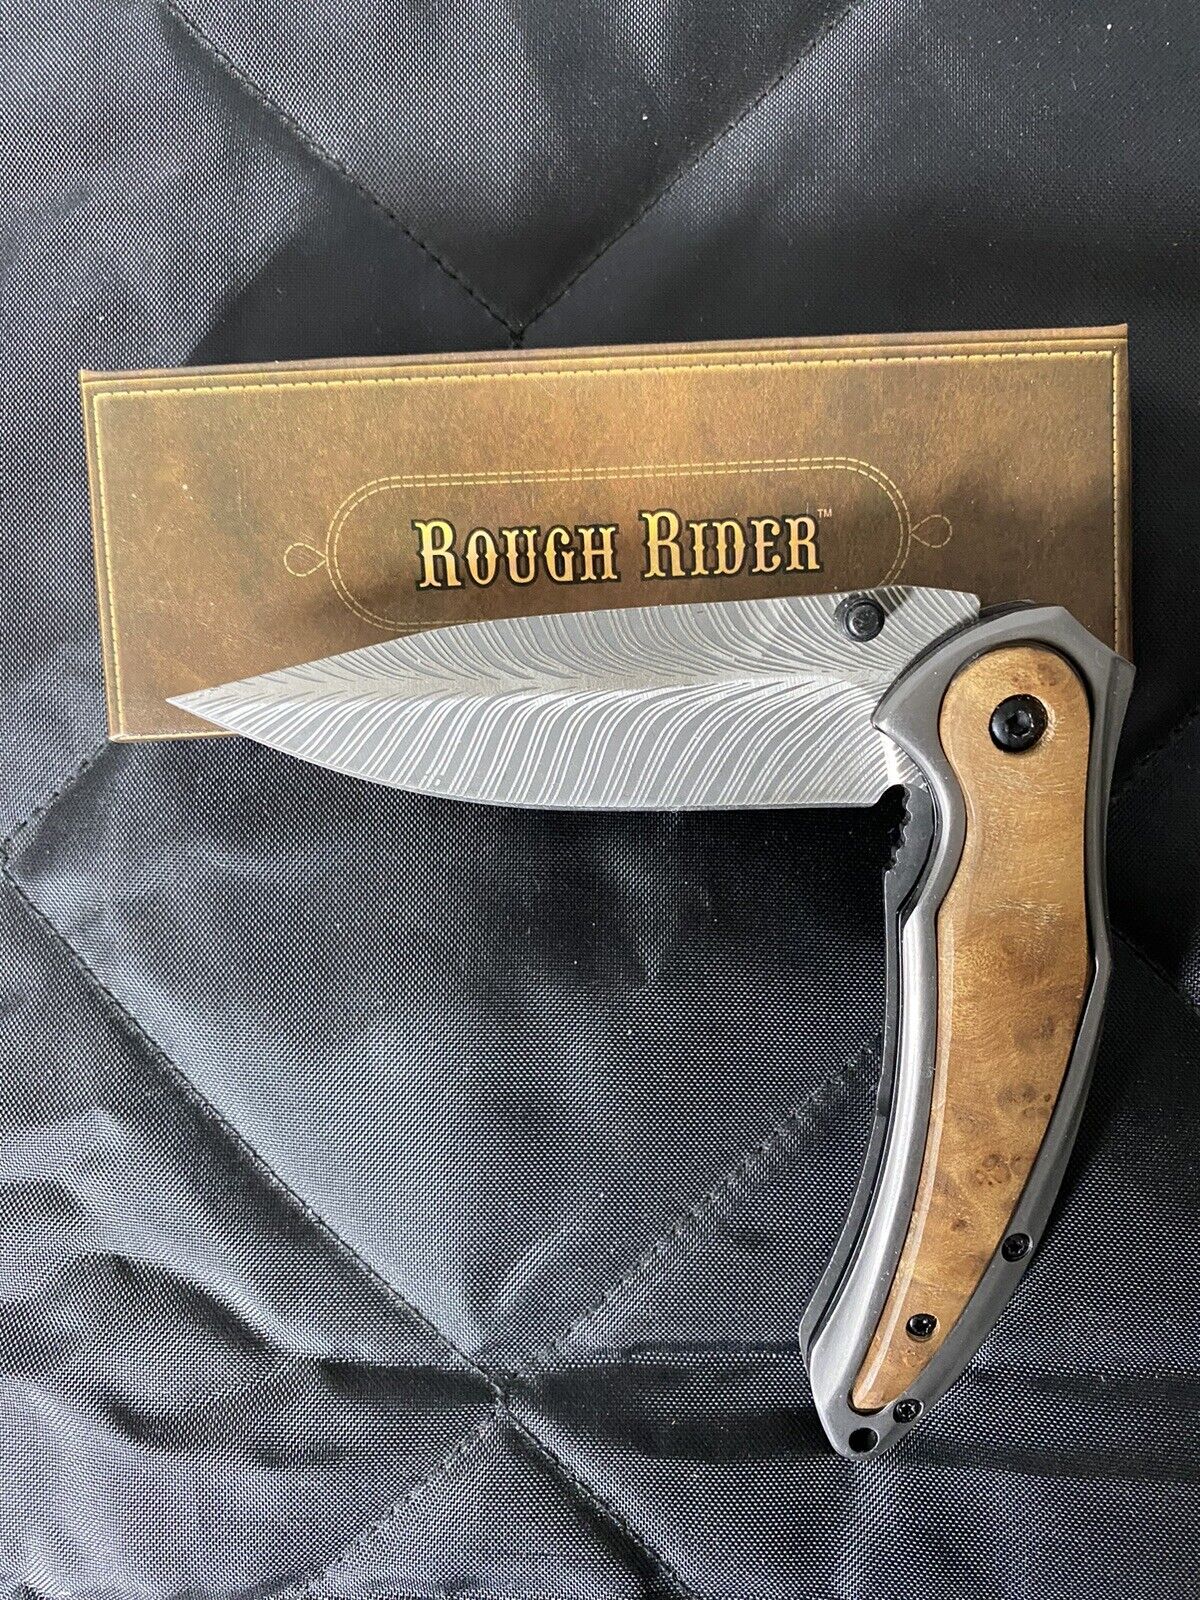 NOS RARE Retired Rough Rider R1653 Feather Blade Knife Beautiful Extreme Quality